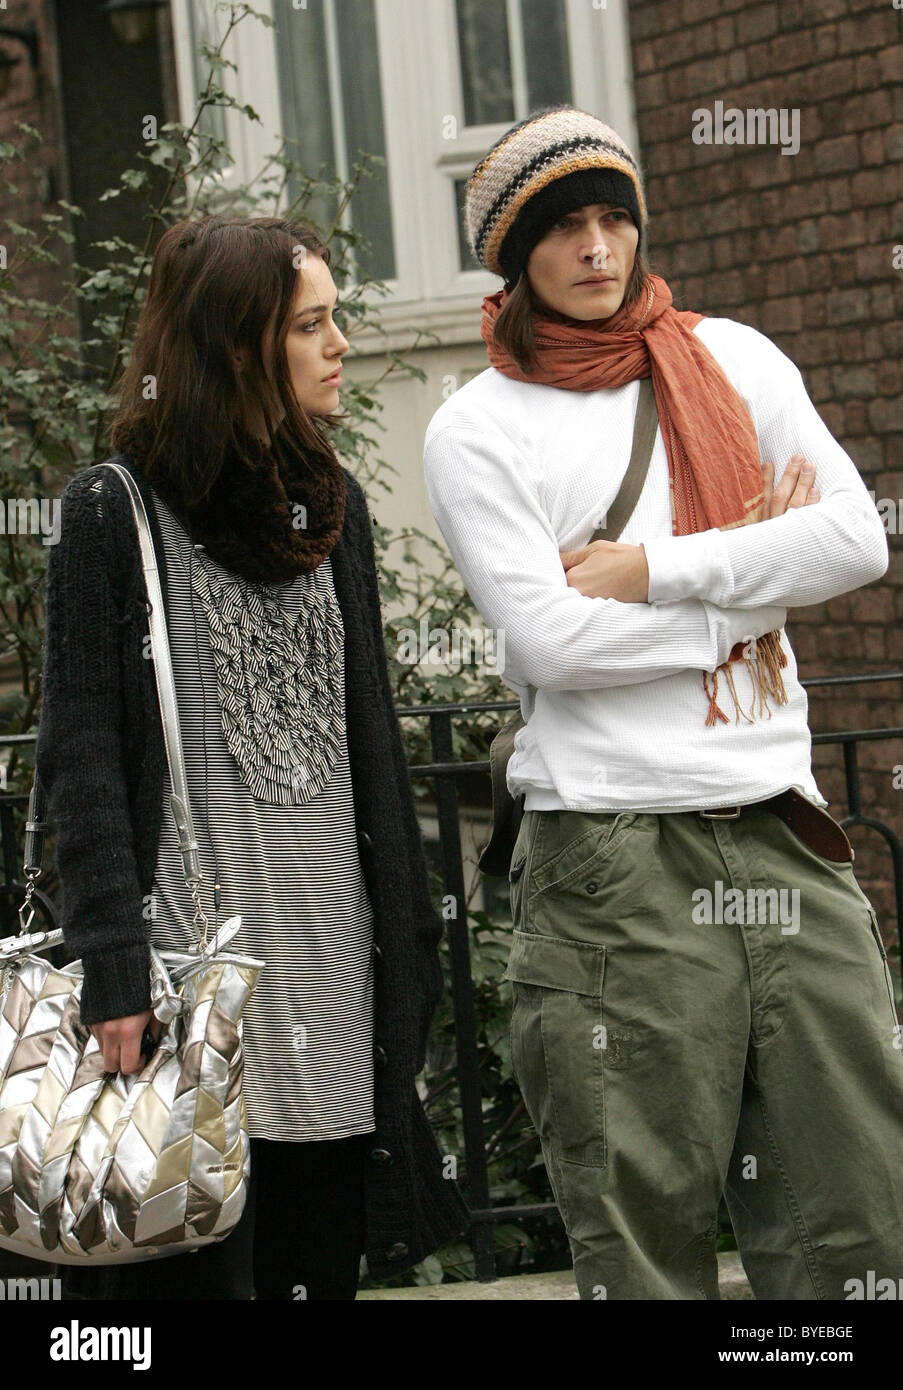 Keira Knightley and boyfriend Rupert Friend stop to pose for the papparazzi in the hope they will leave them in peace. When Stock Photo